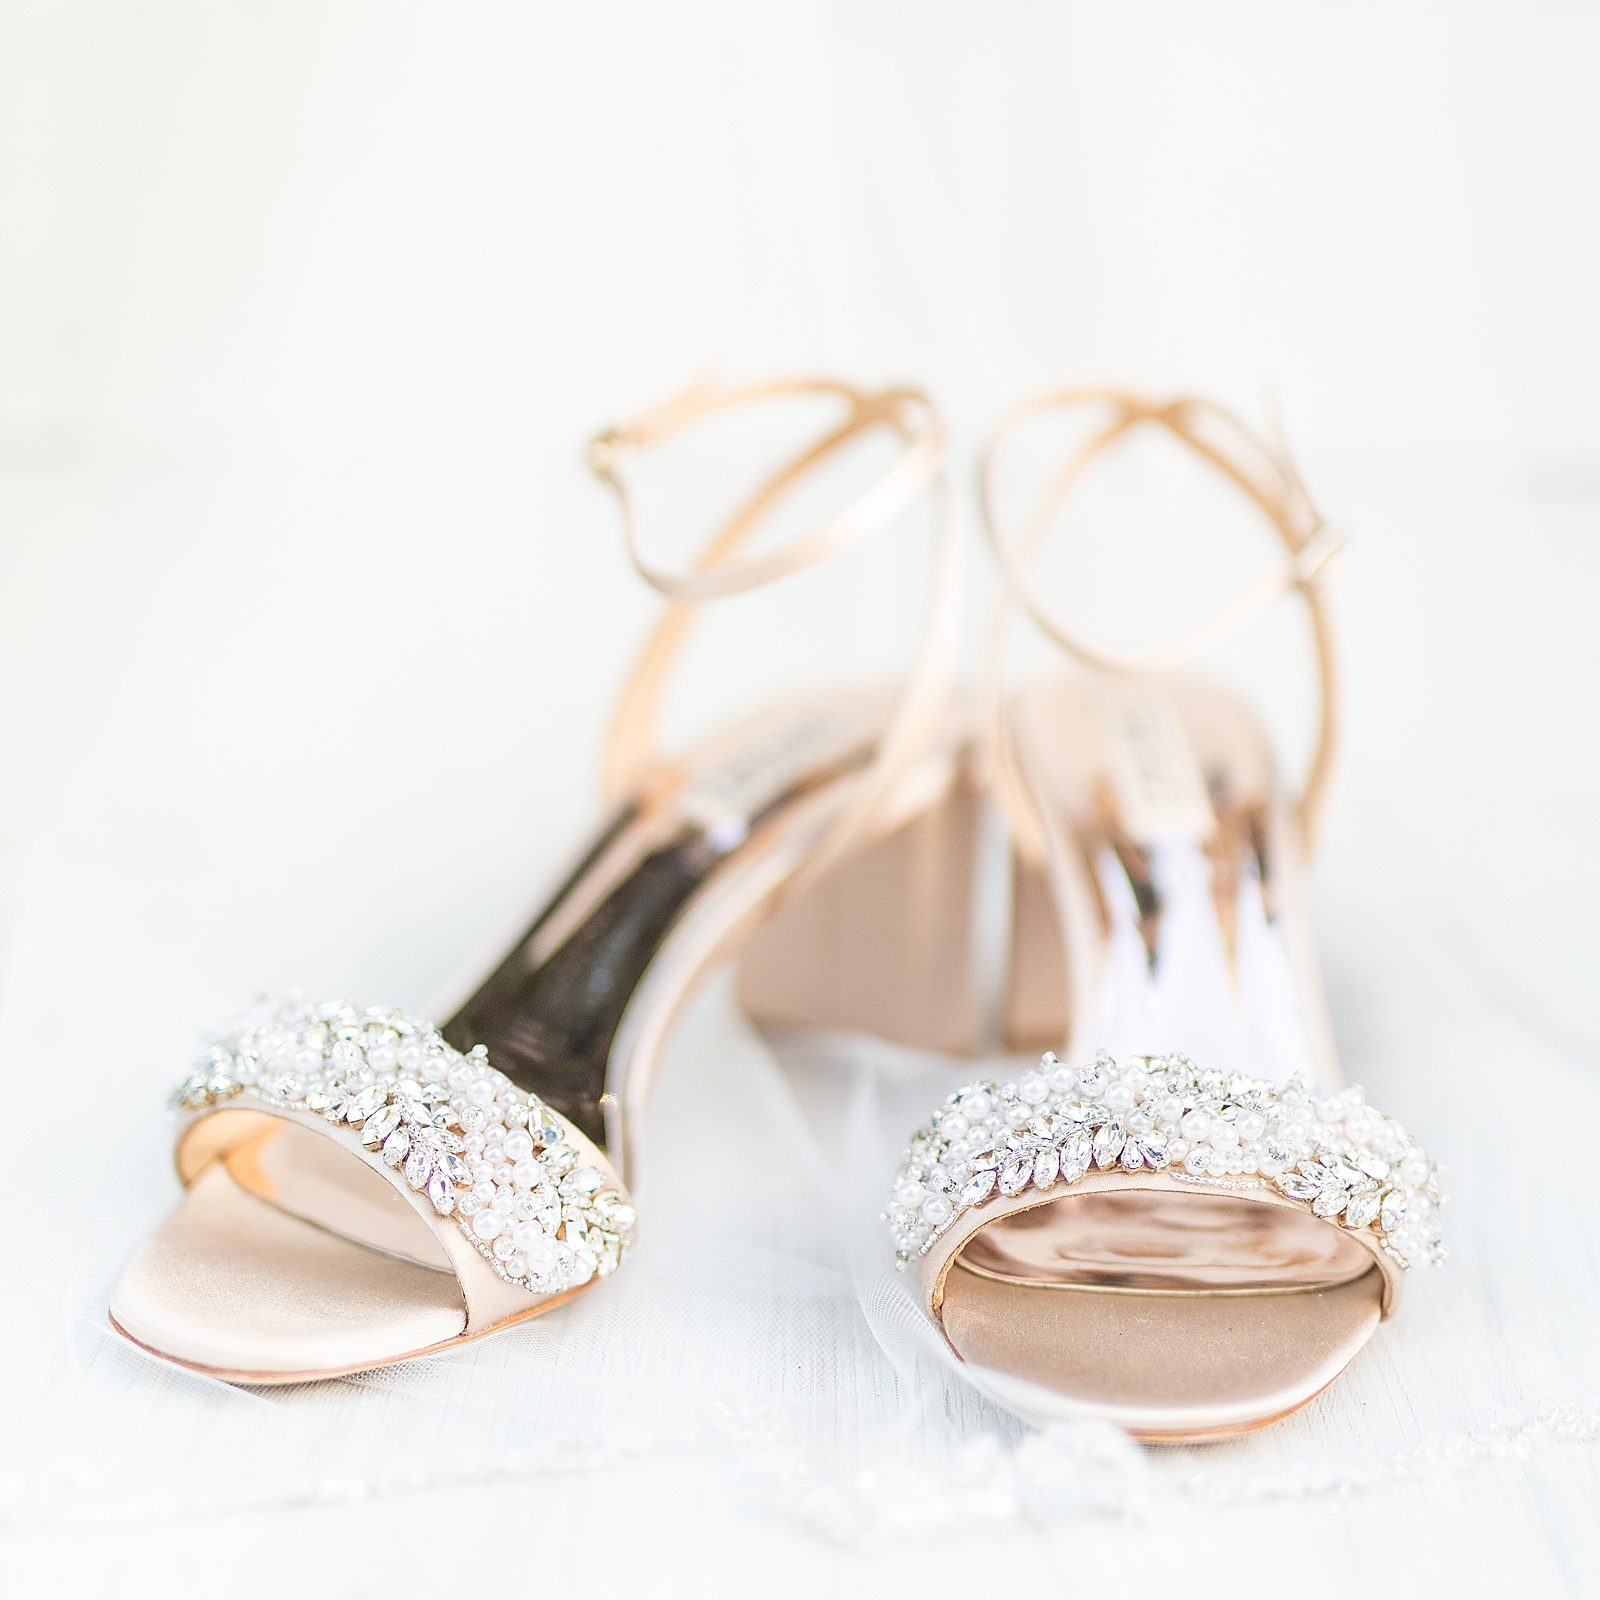 Badgley Mischka bridal shoes photographed by Sherr Weddings in San Diego California.